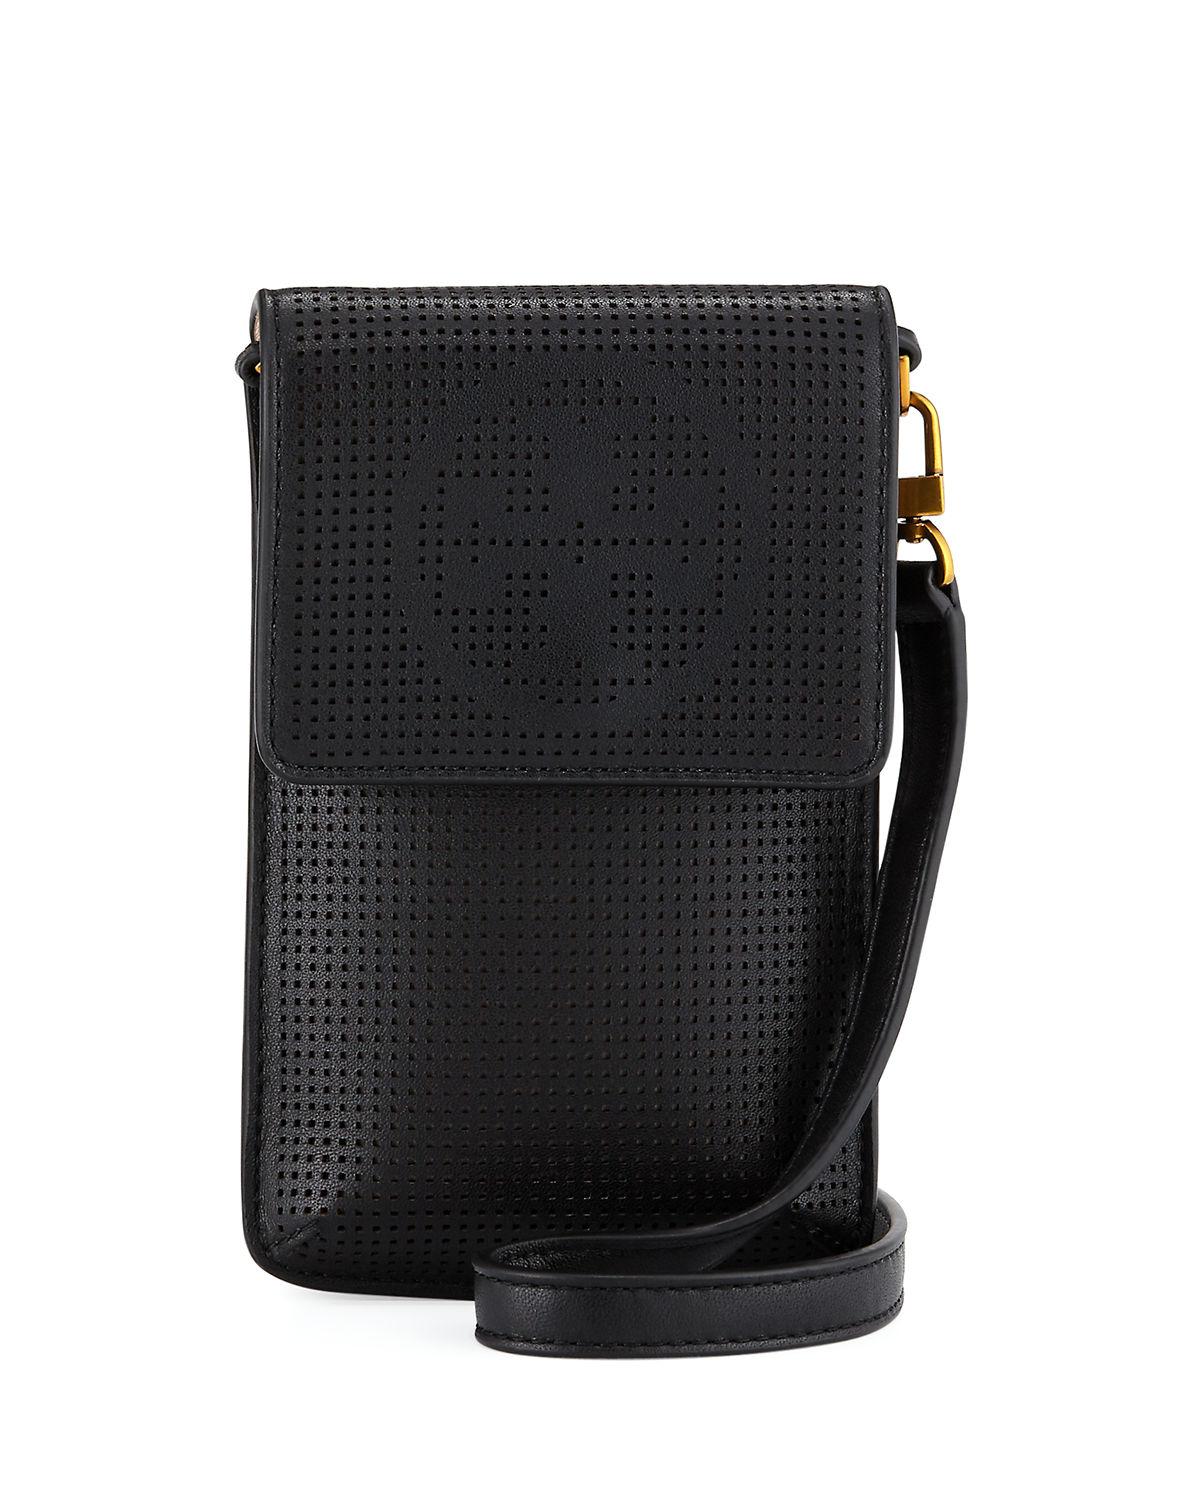 Lyst - Tory Burch Perforated Crossbody Phone Case in Black